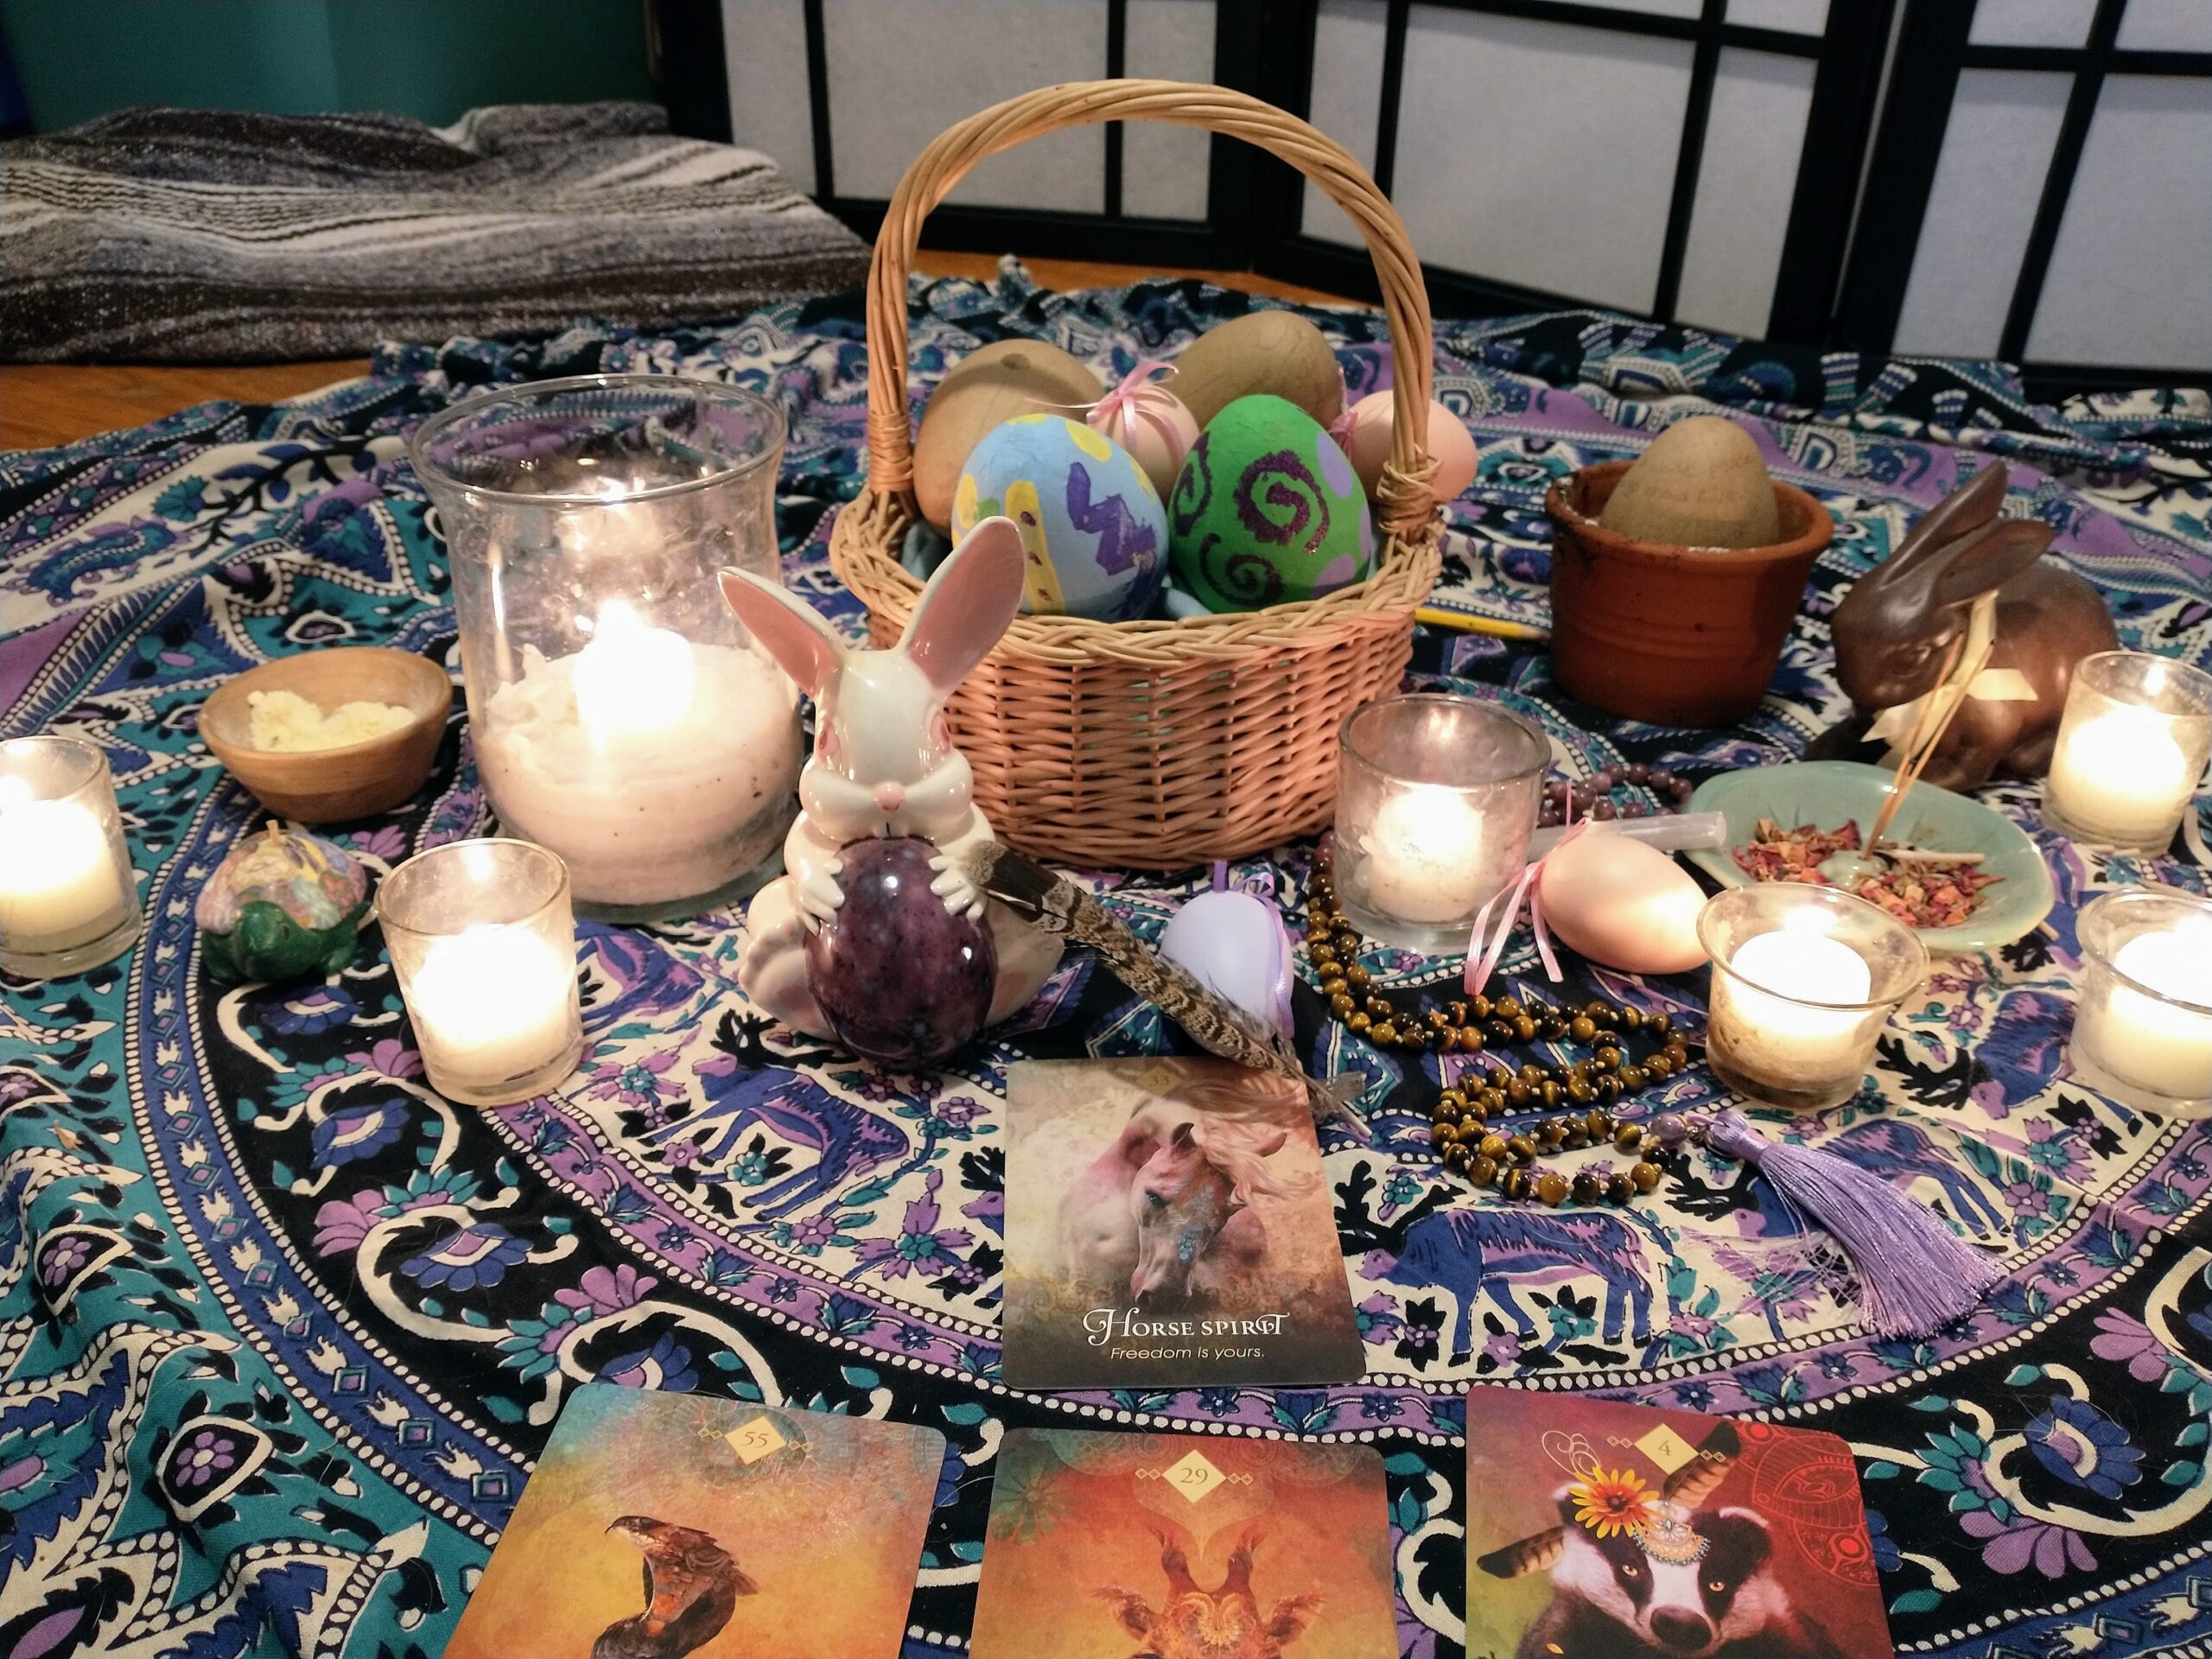 An altar laid out on a colored tablecloth with candles, ceramic bunnies, and a basket of colored eggs